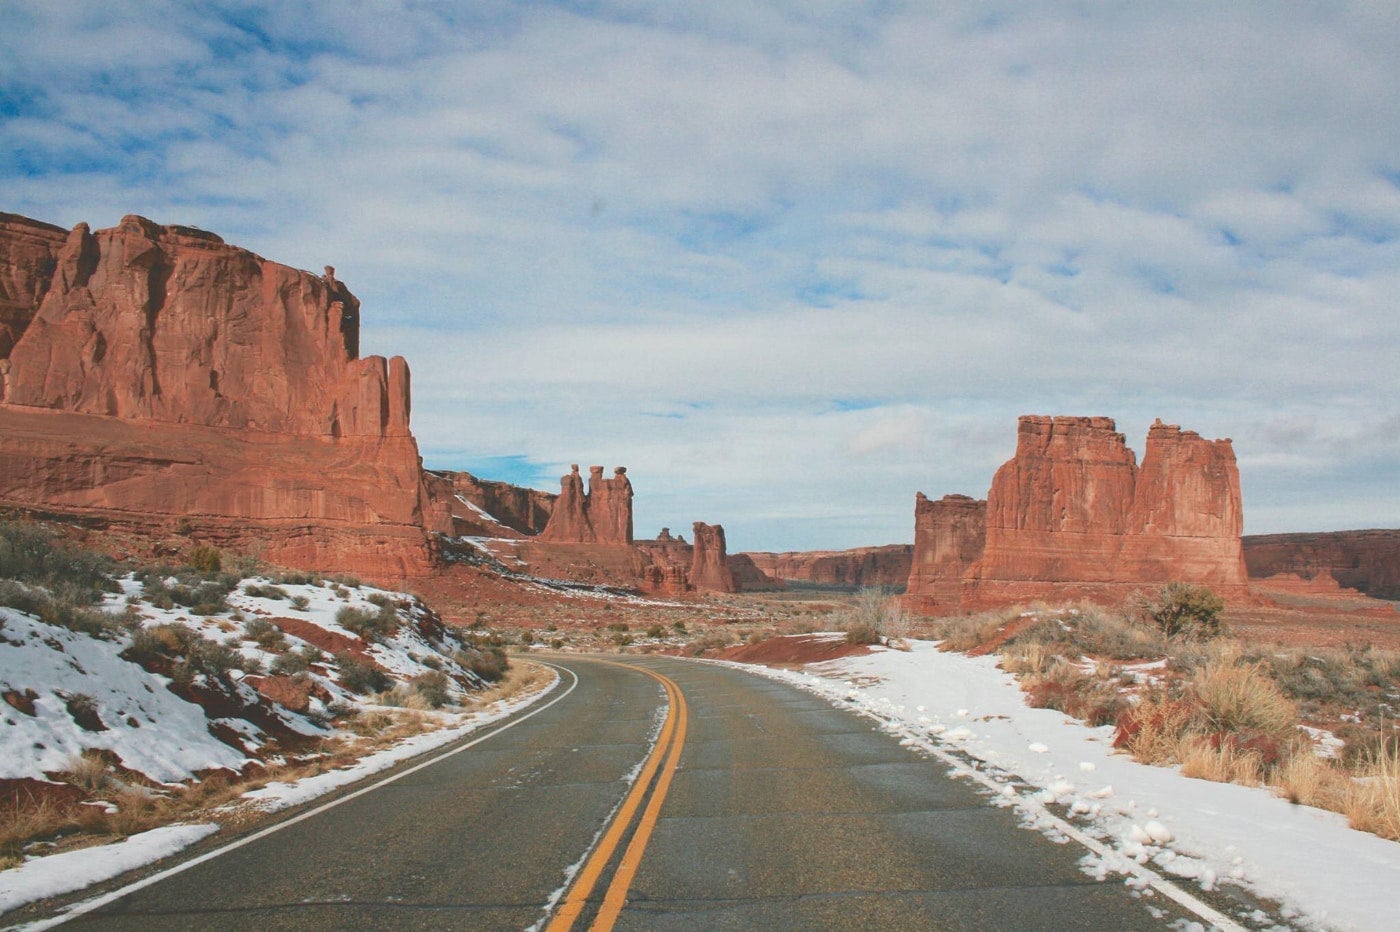 Two lane road winds through the snow-dusted desert in arches national park surrounded by red rock formations